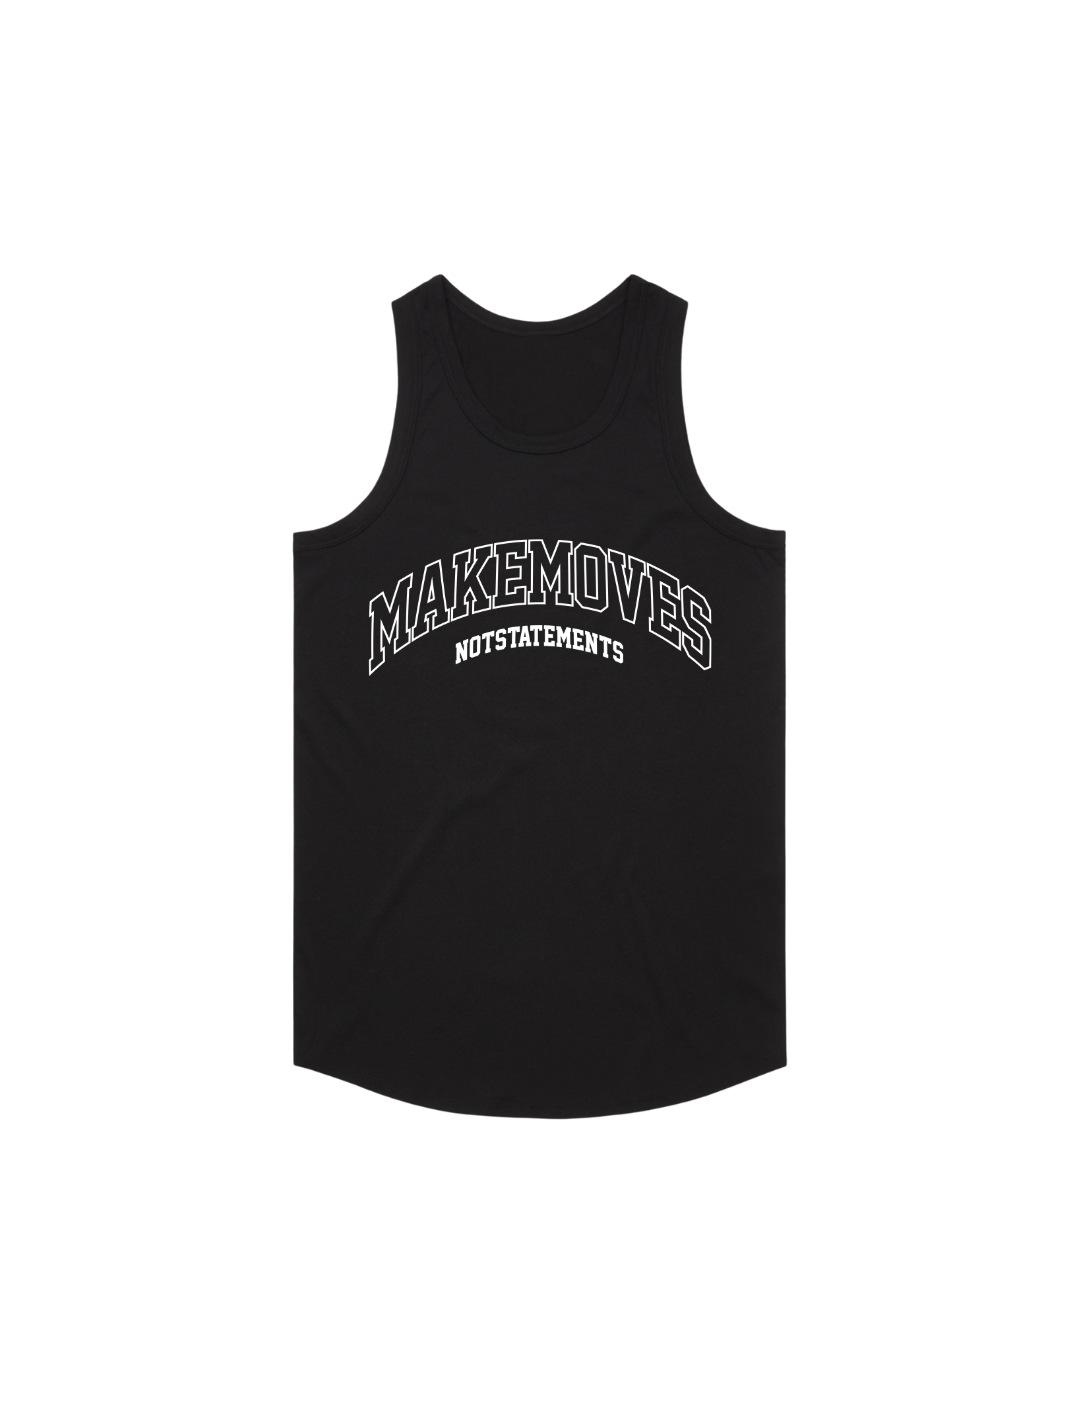 The Make Moves Not Statements Sport Tank is slightly narrow at upper chest, curved hem, double needle bottom hem. The sports tank features a large MMNS logo across the front in white outlined font.